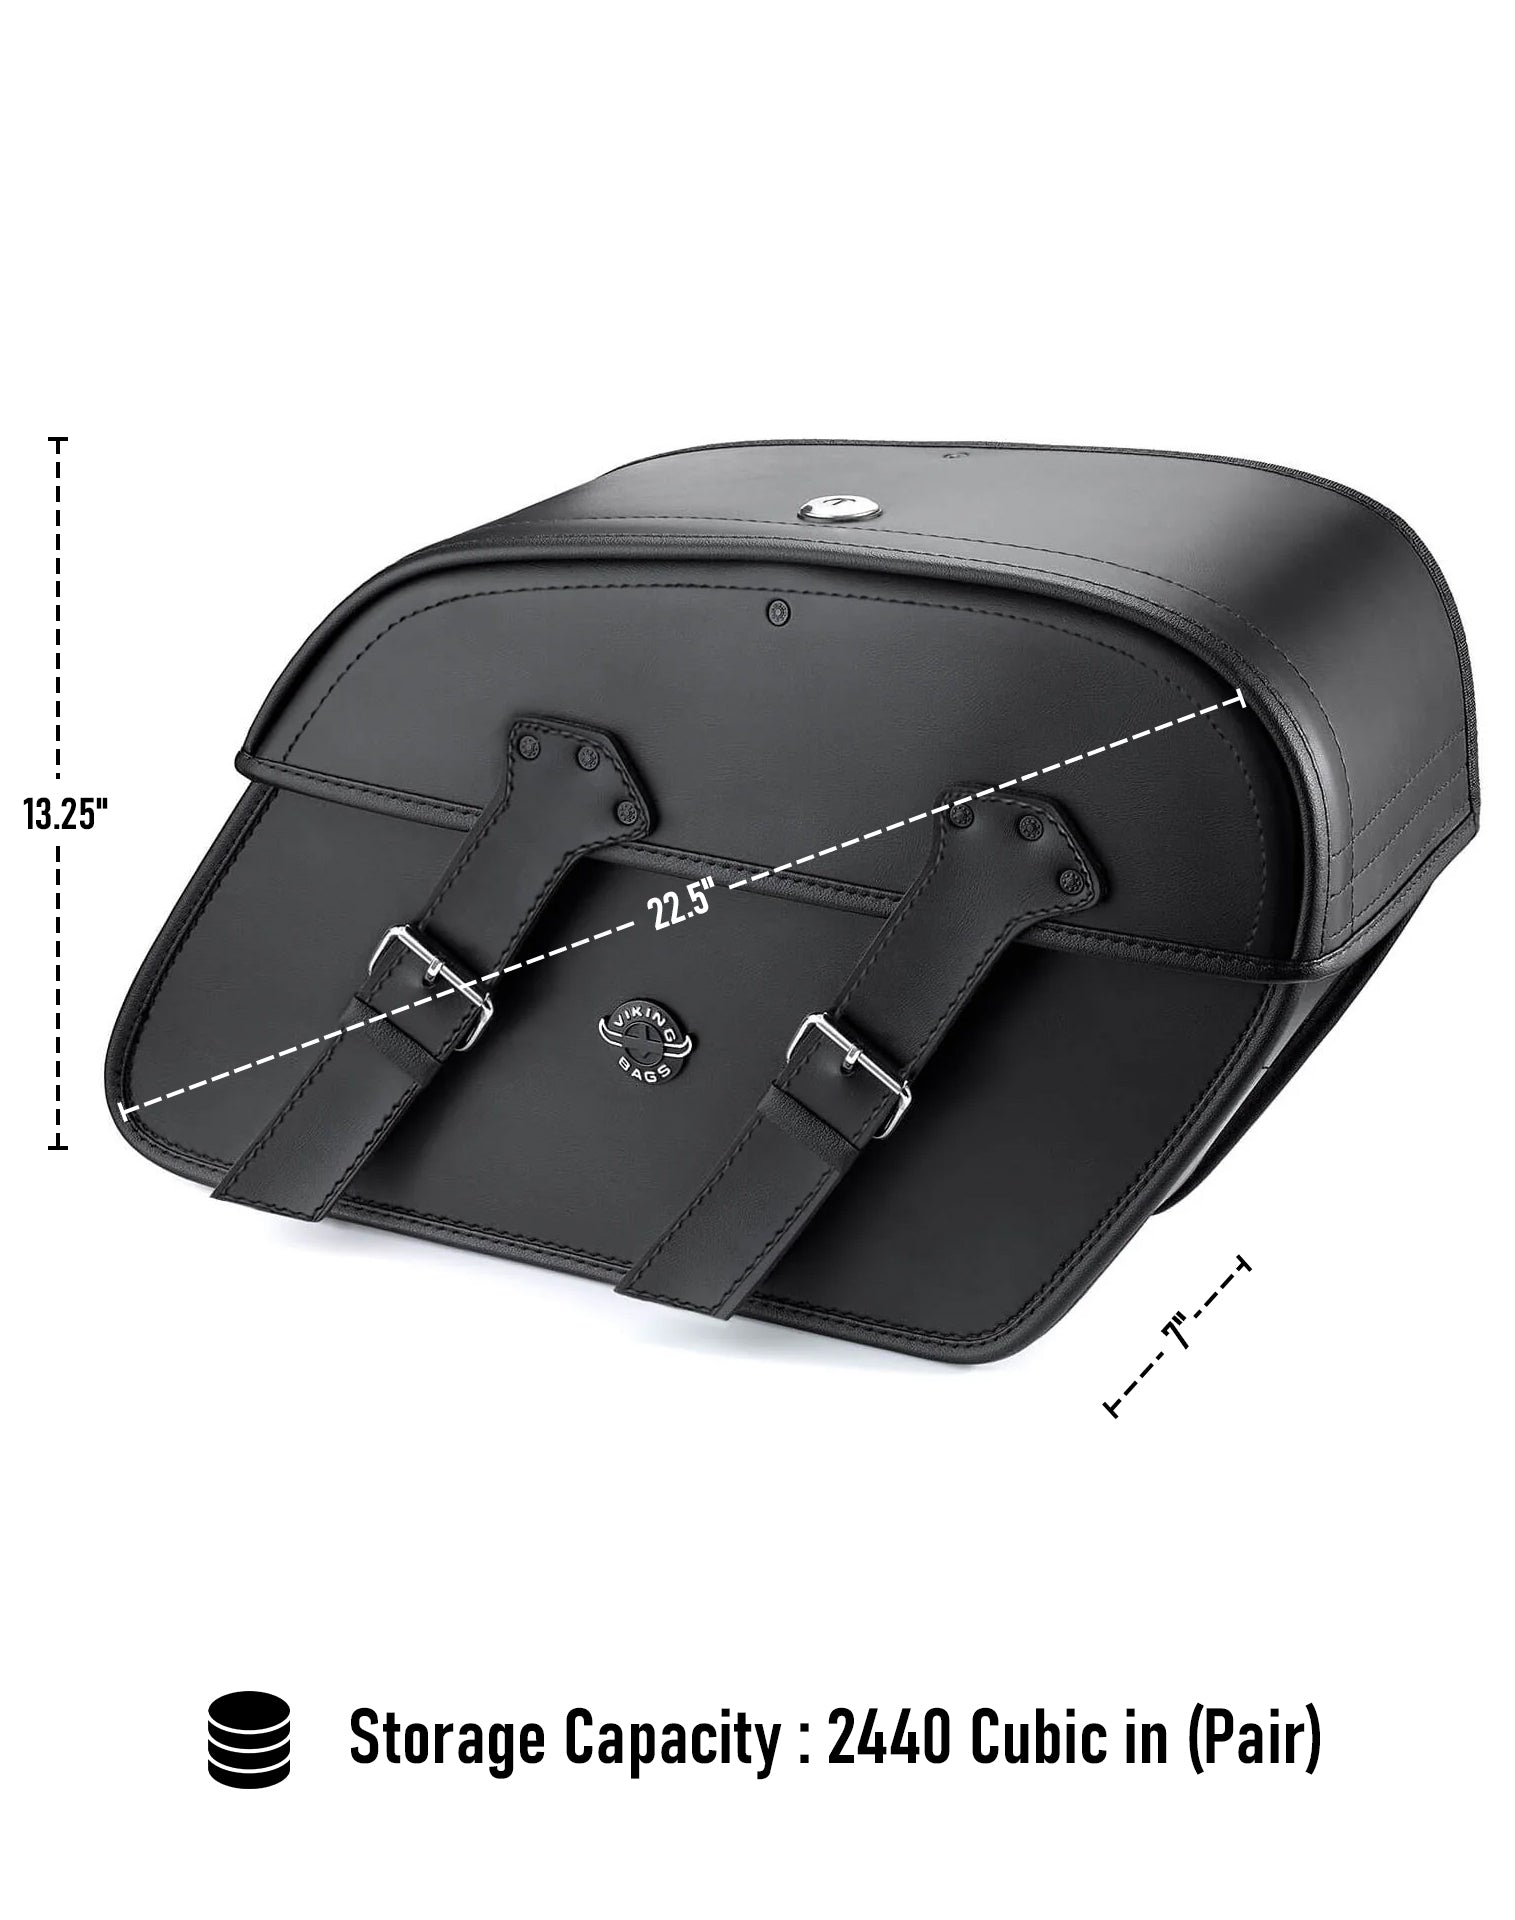 Viking Raven Extra Large Honda Vtx 1300 S Leather Motorcycle Saddlebags Can Store Your Ridings Gears